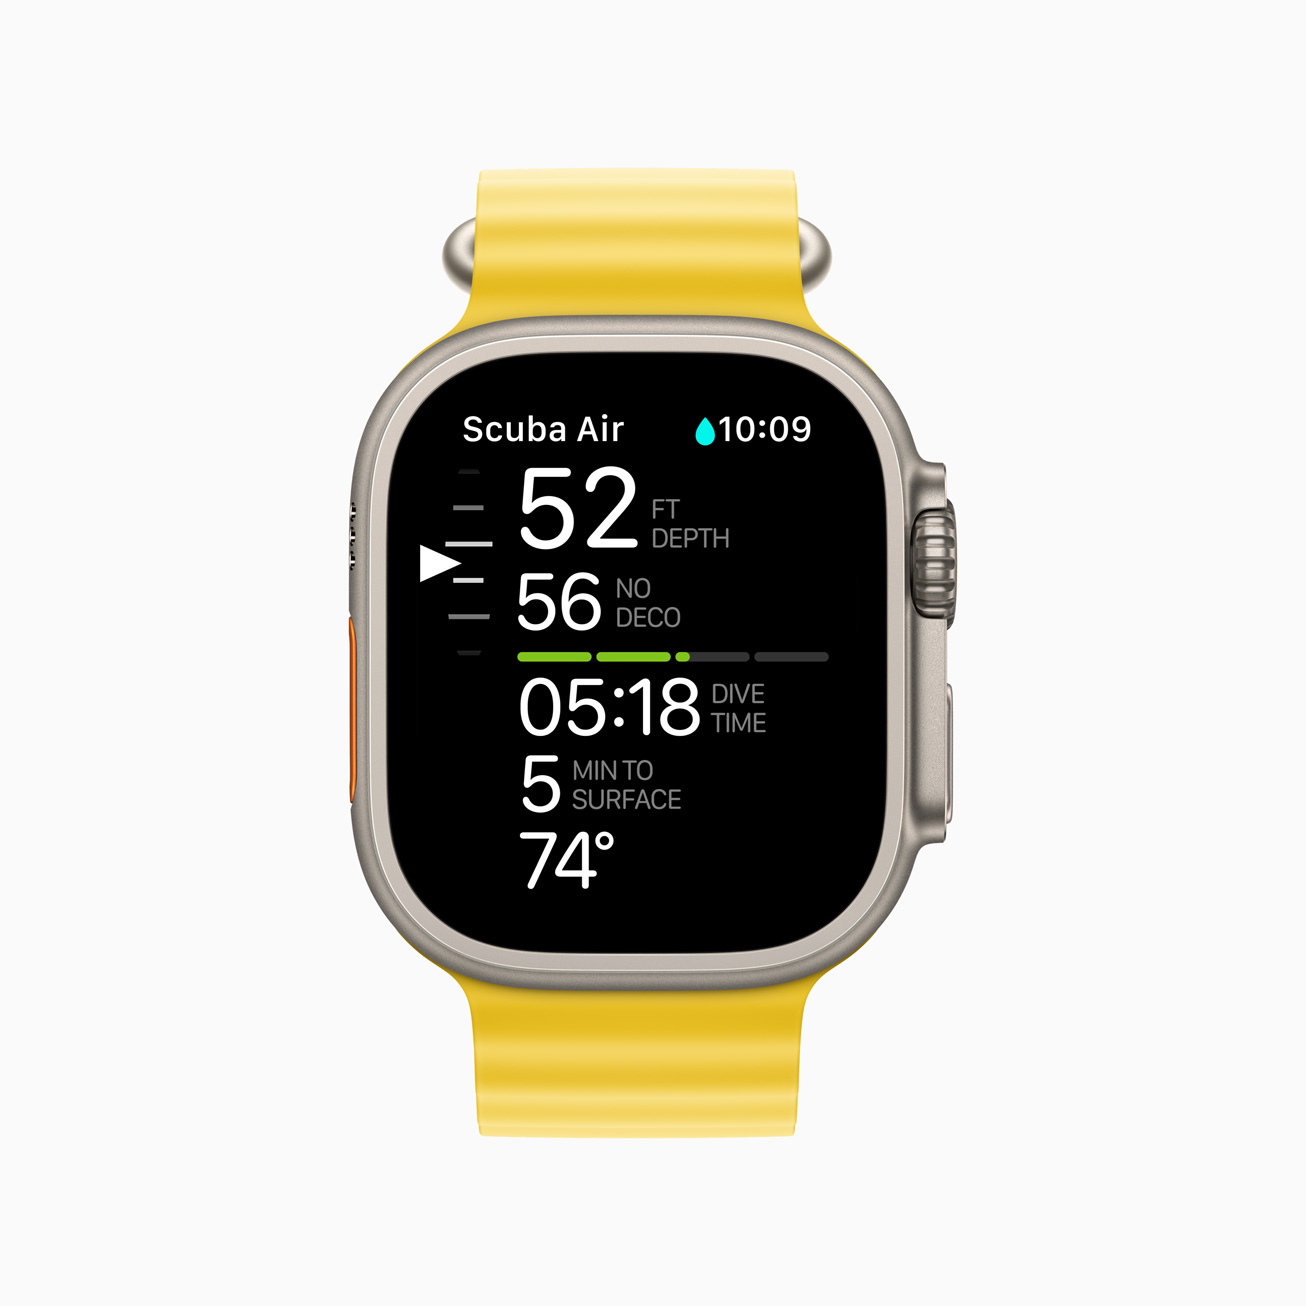 How Smart Band Adds Capabilities for the Apple Watch, by Shmuel Barel, The Startup